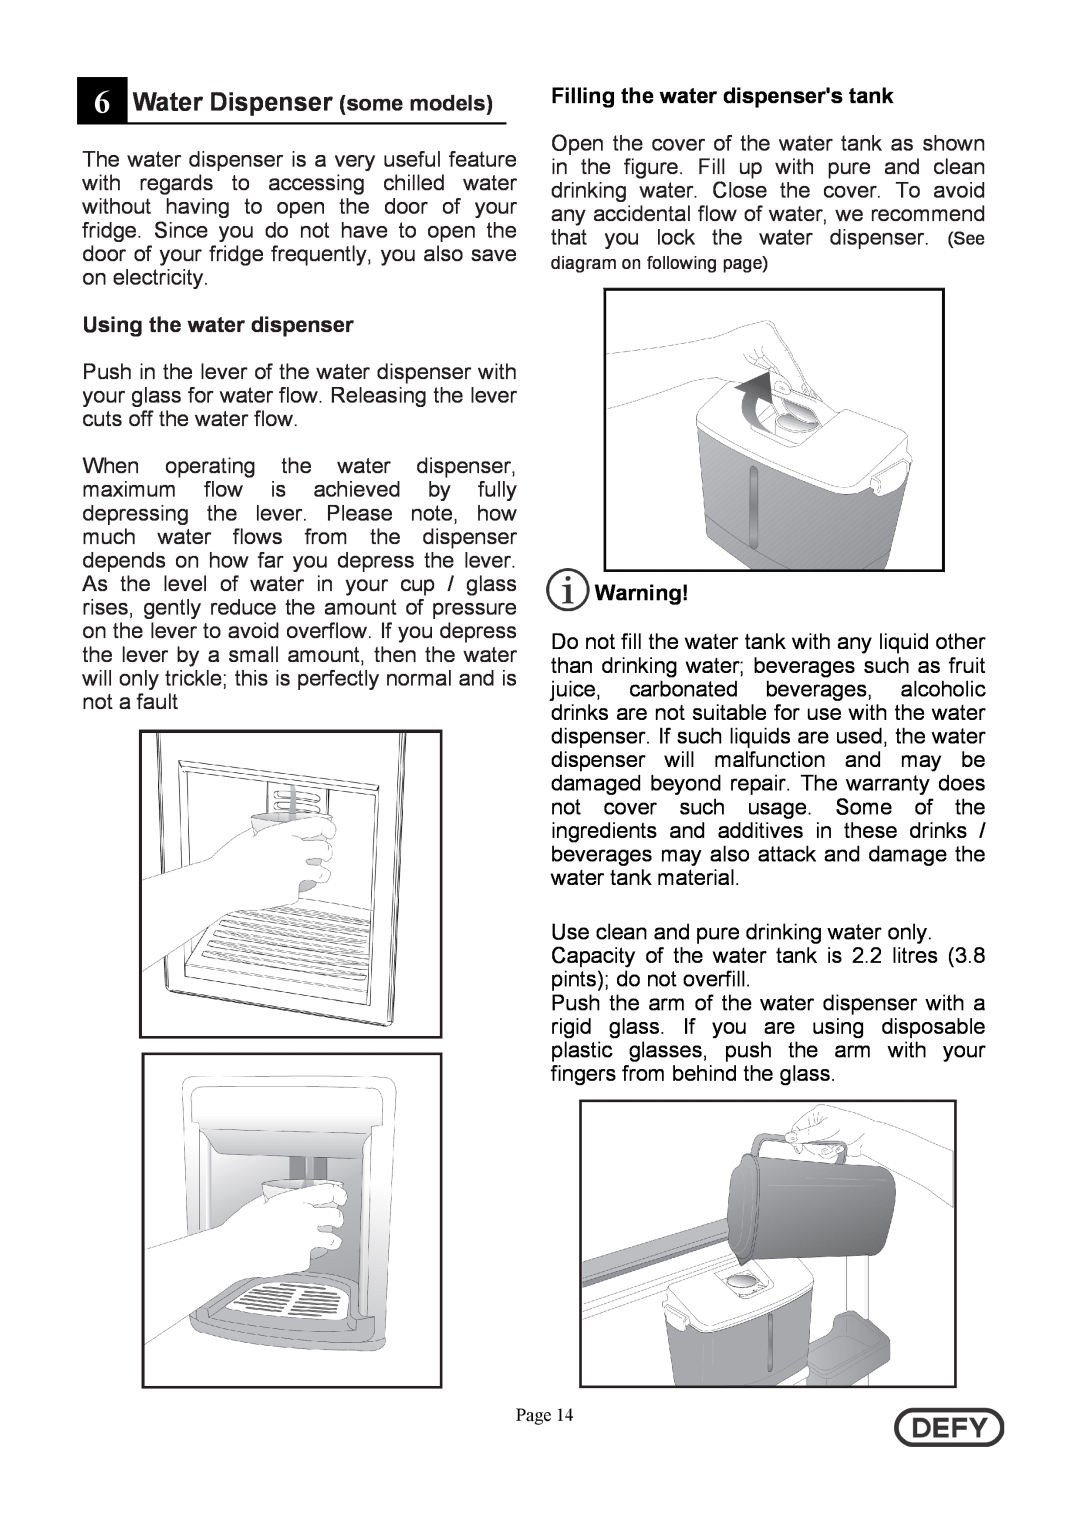 Defy Appliances DFC402 instruction manual Water Dispenser some models, Filling the water dispensers tank 